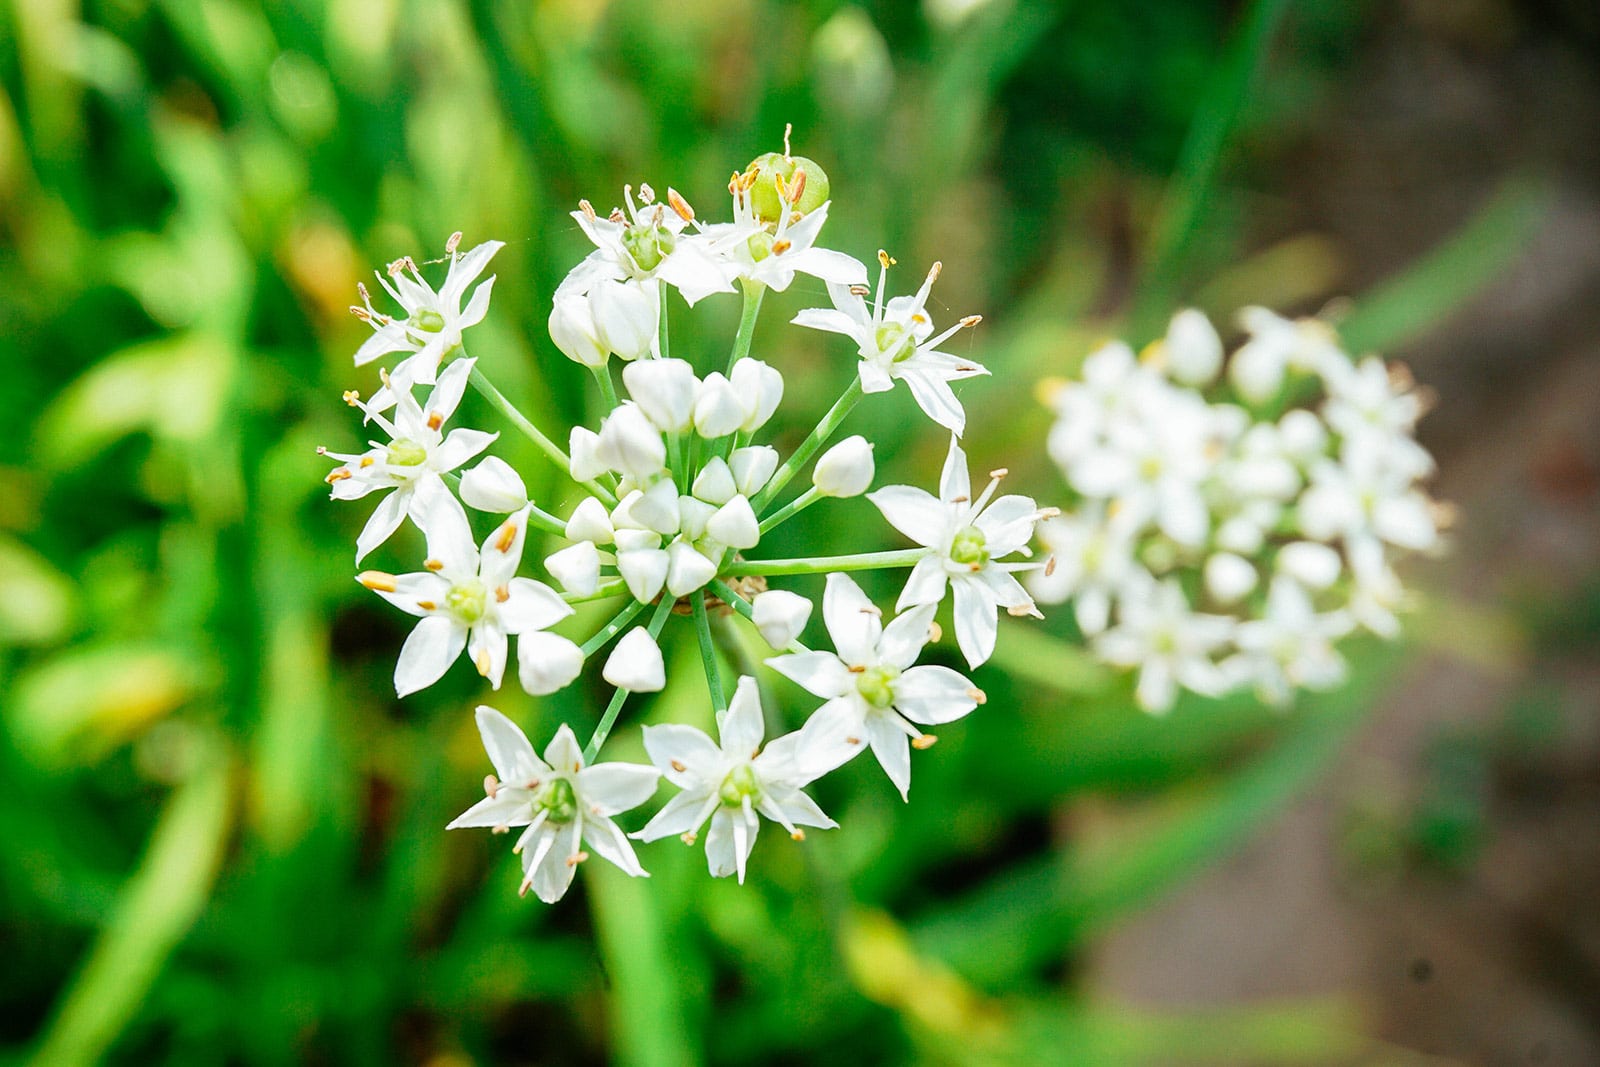 White garlic chive blossom in bloom with individual florets